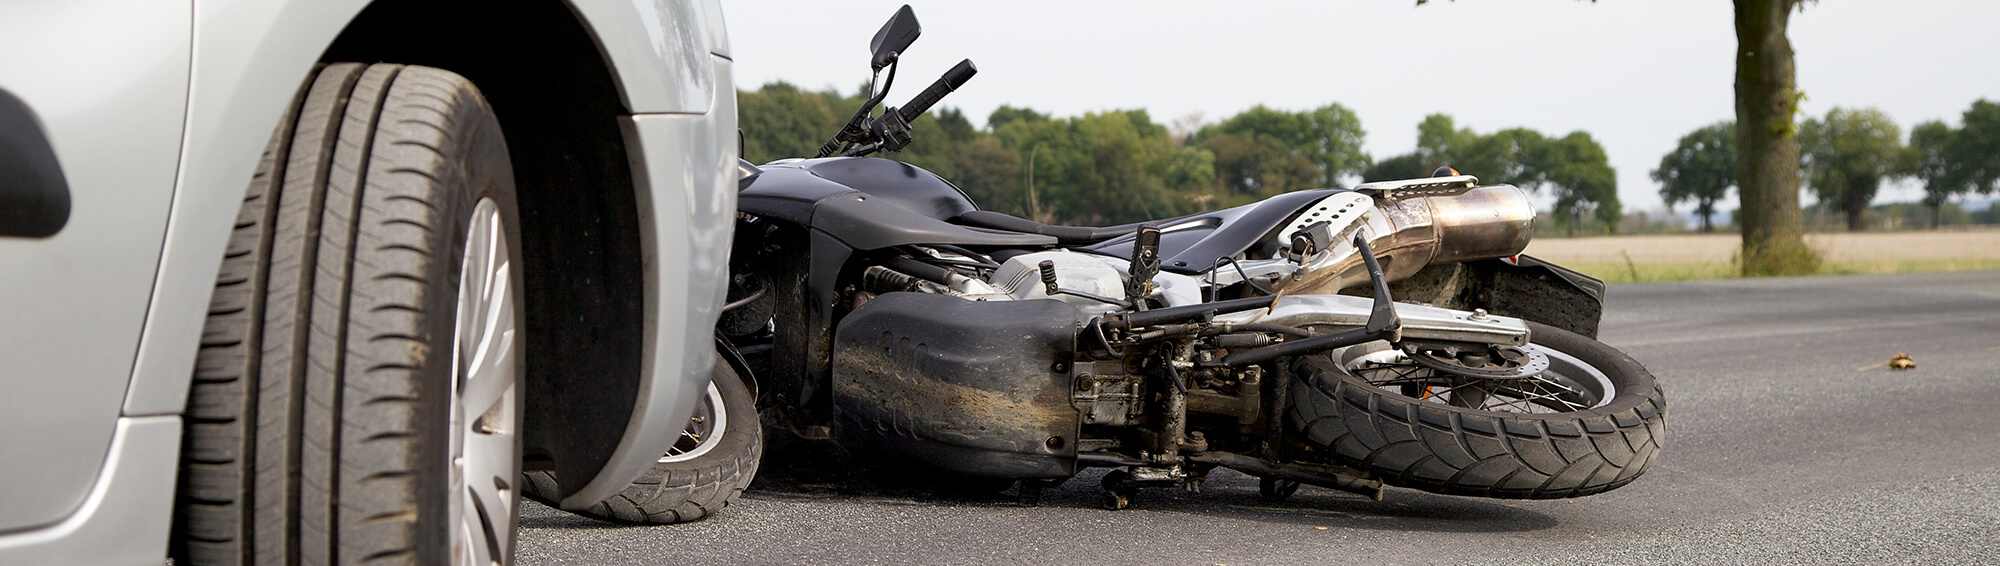 It’s Motorcycle Safety Awareness Month, But Don’t Count on Drivers Seeing You!